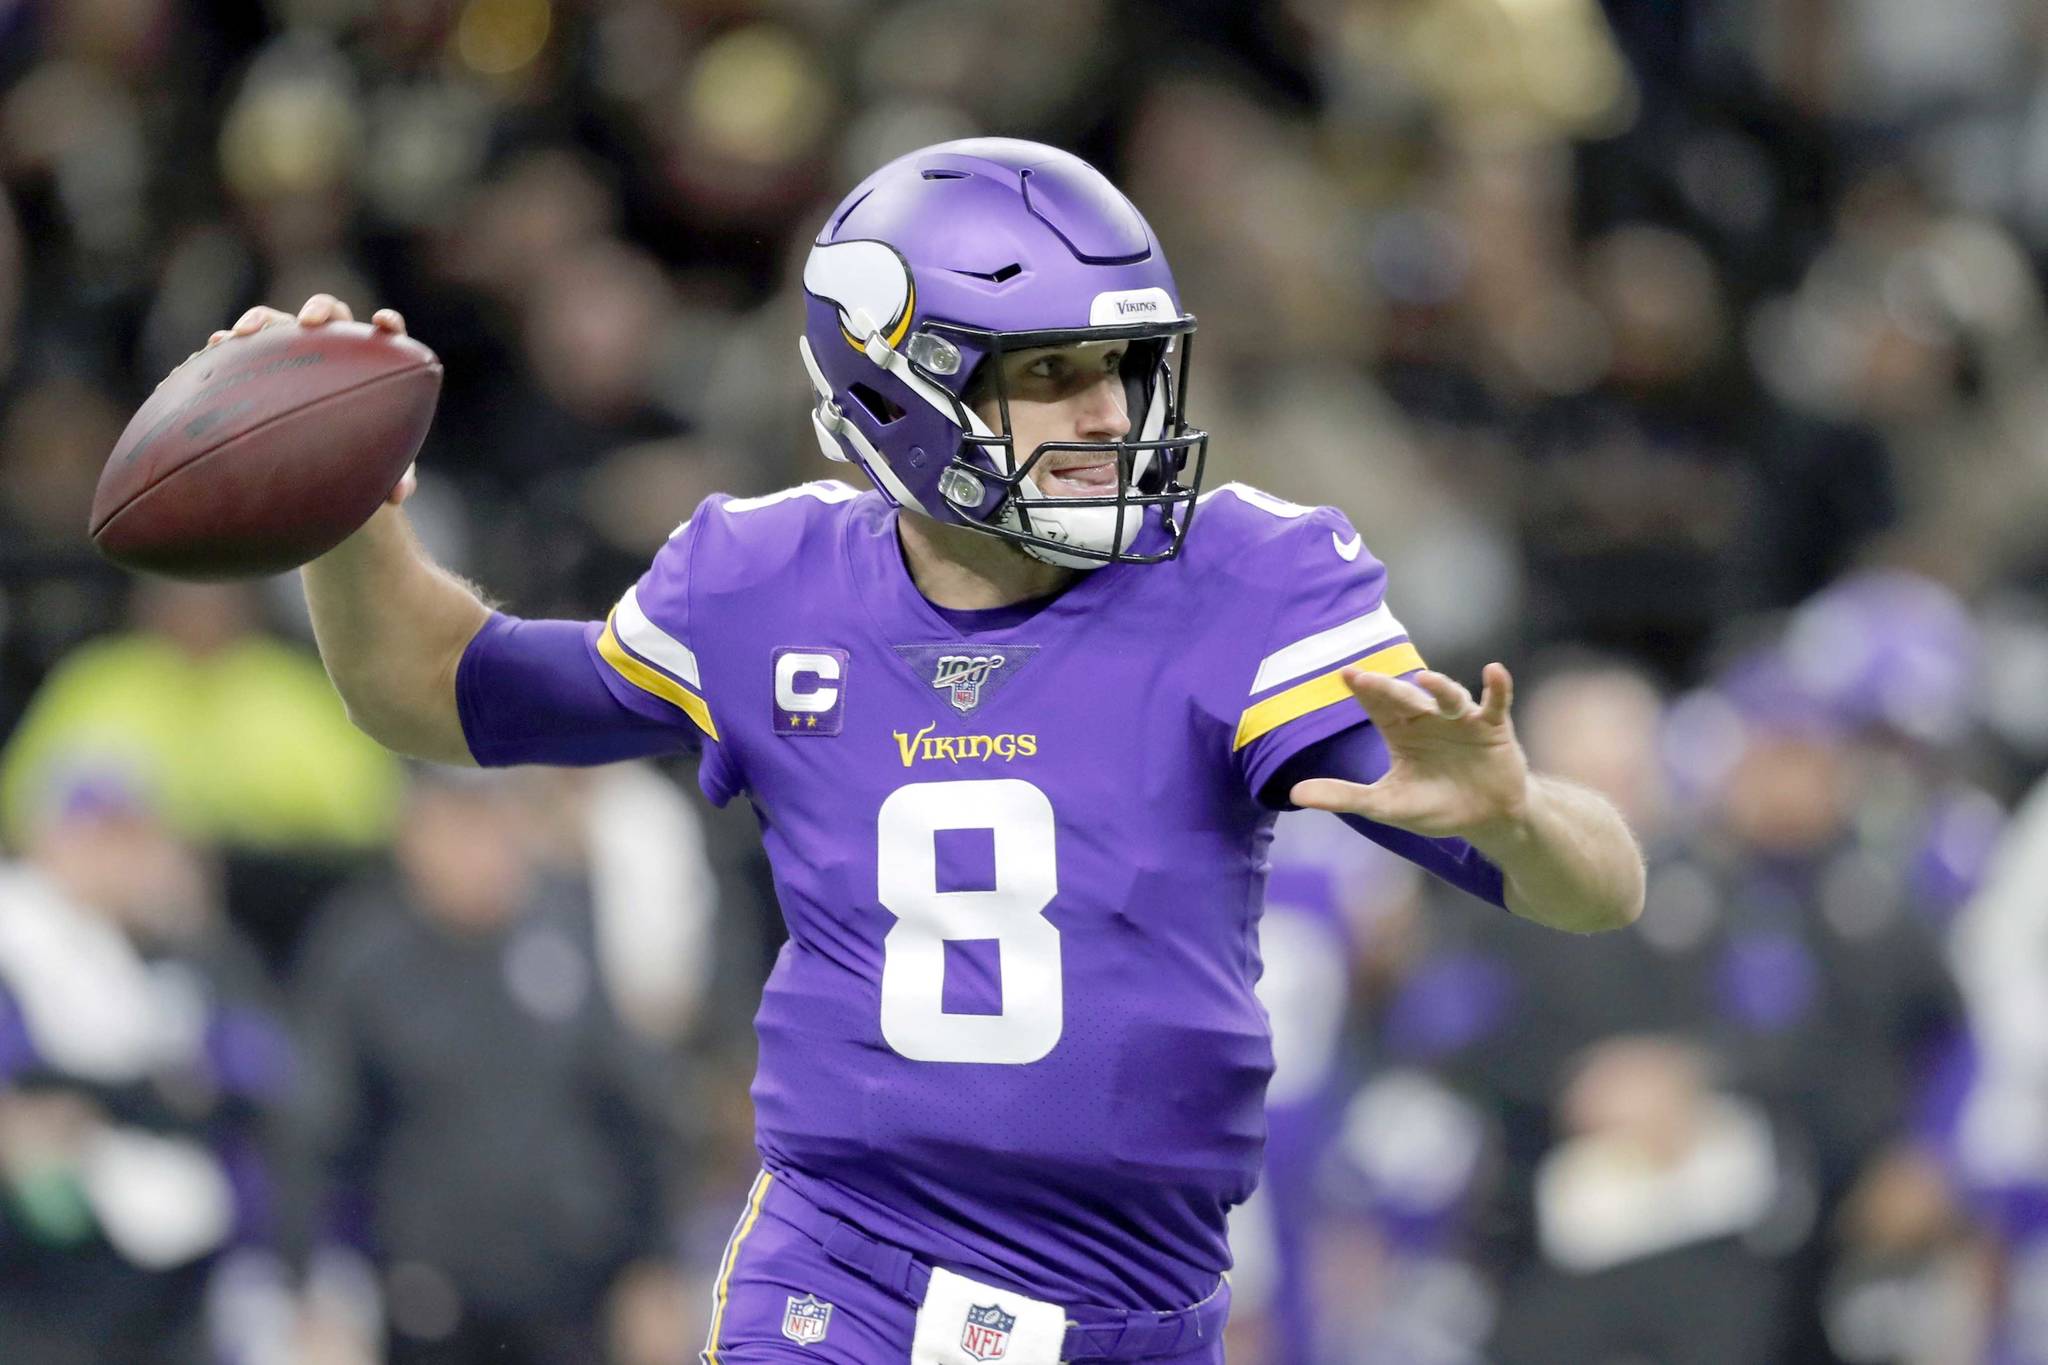 Minnesota Vikings quarterback Kirk Cousins (8) drops back to pass as he throws a pass that was fumbled and recovered by the New Orleans Saints in the first half of an NFL wild-card playoff football game, Sunday, Jan. 5, 2020, in New Orleans. (AP Photo/Gerald Herbert)